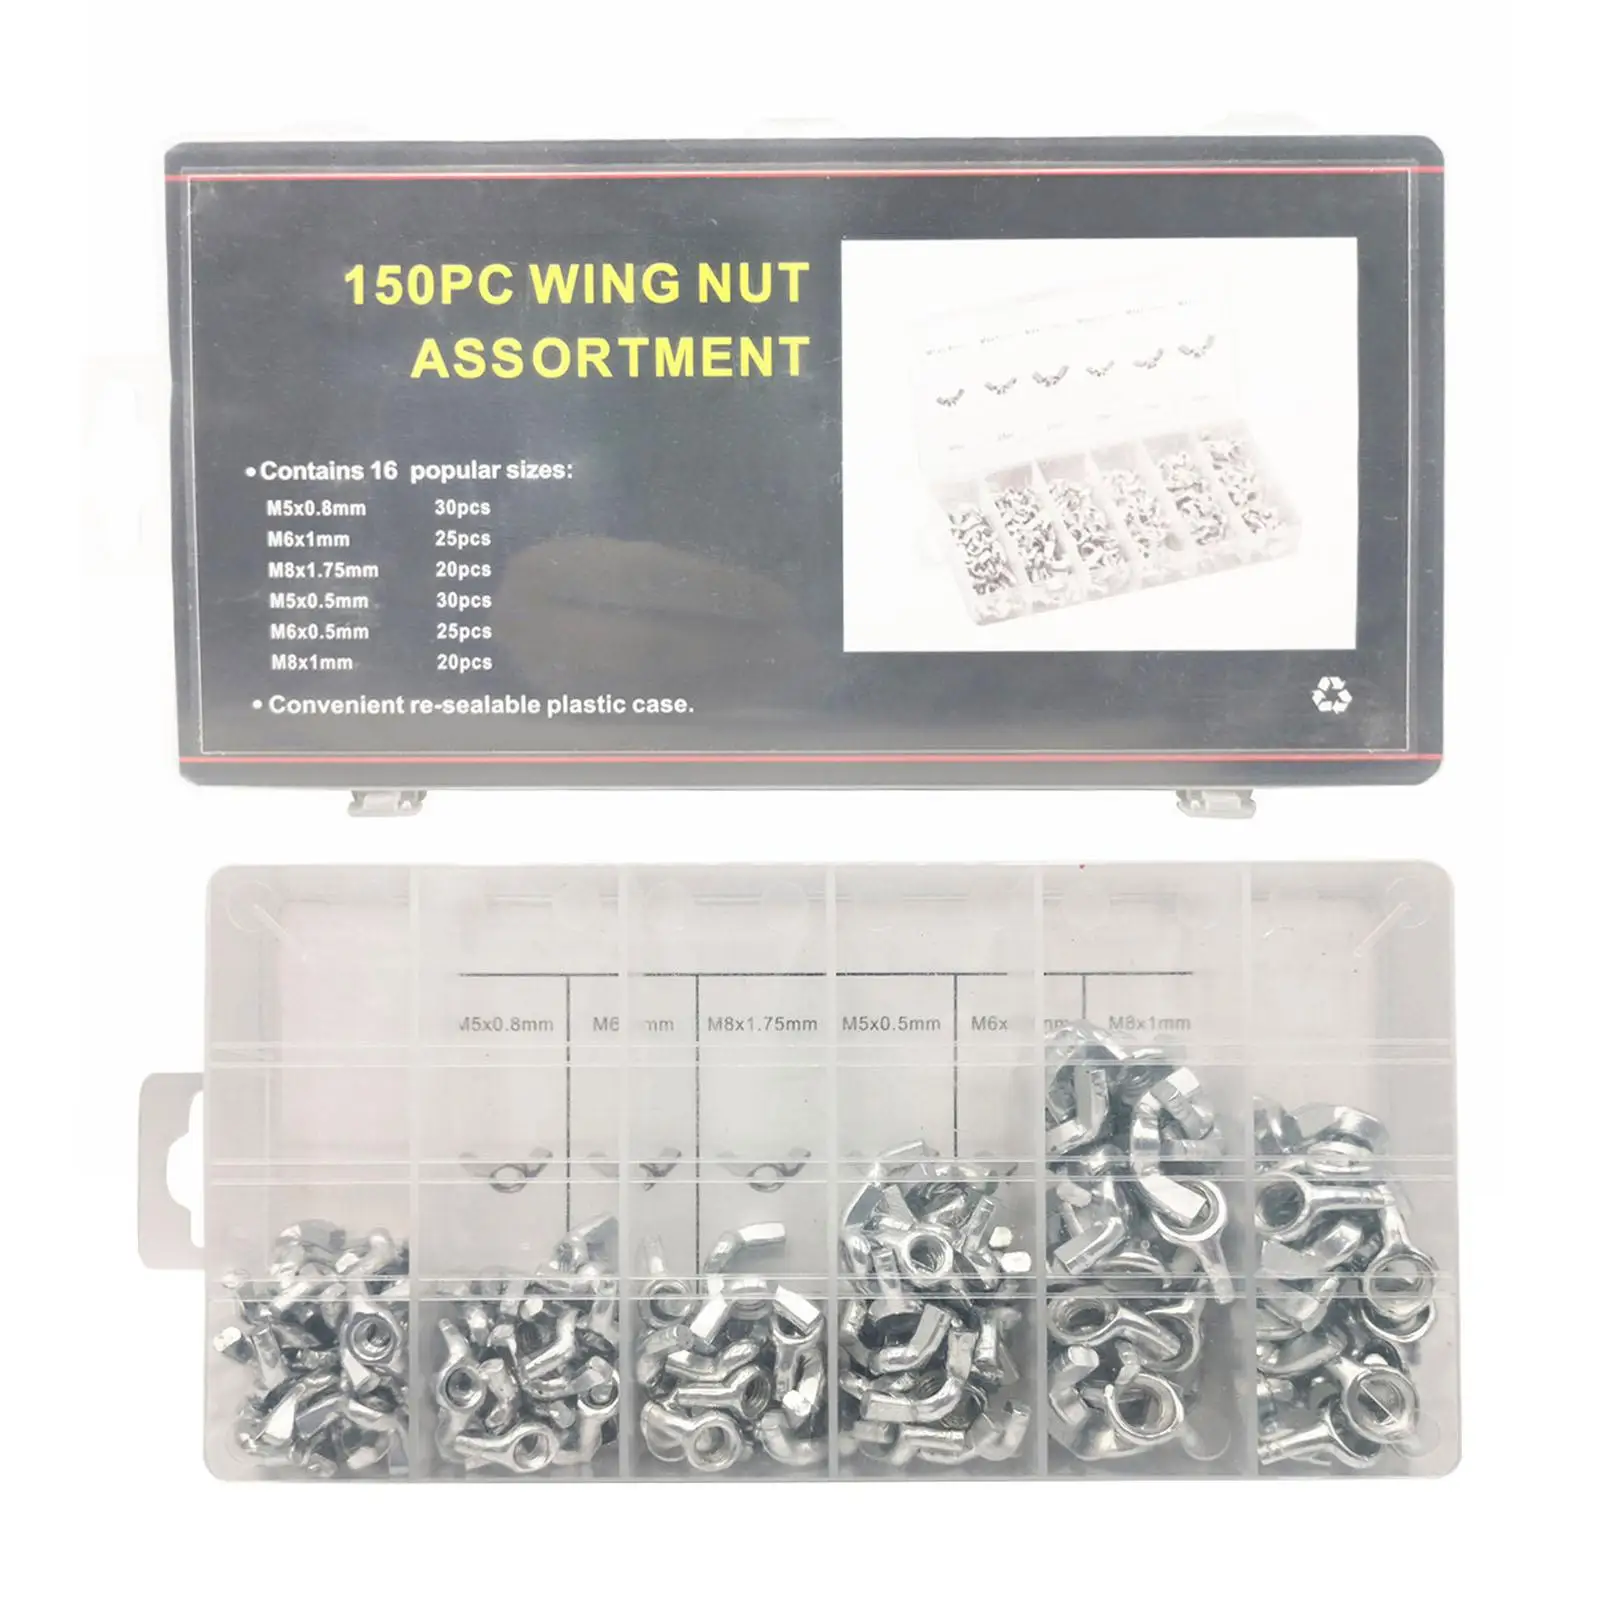 150Pcs Butterfly Wing Nuts Assortment Kit M5 M6 M8 Ear Butterfly Nut with Box Fasteners